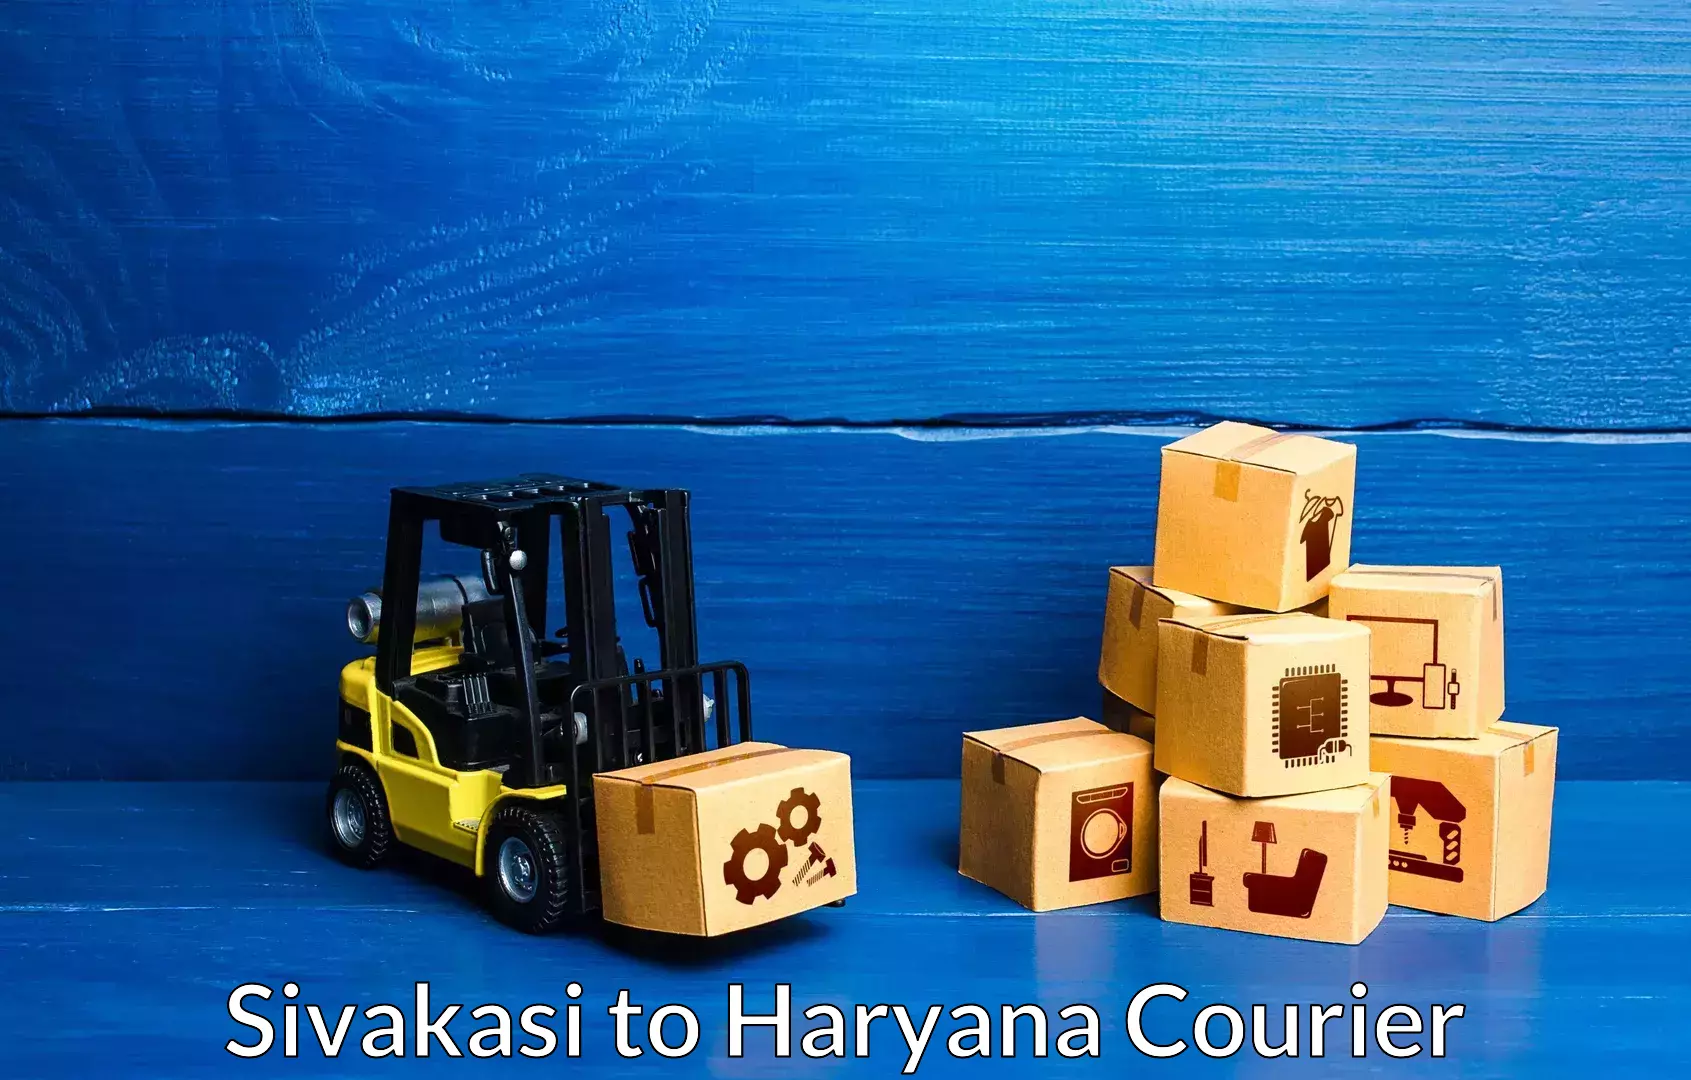 Furniture delivery service Sivakasi to NCR Haryana